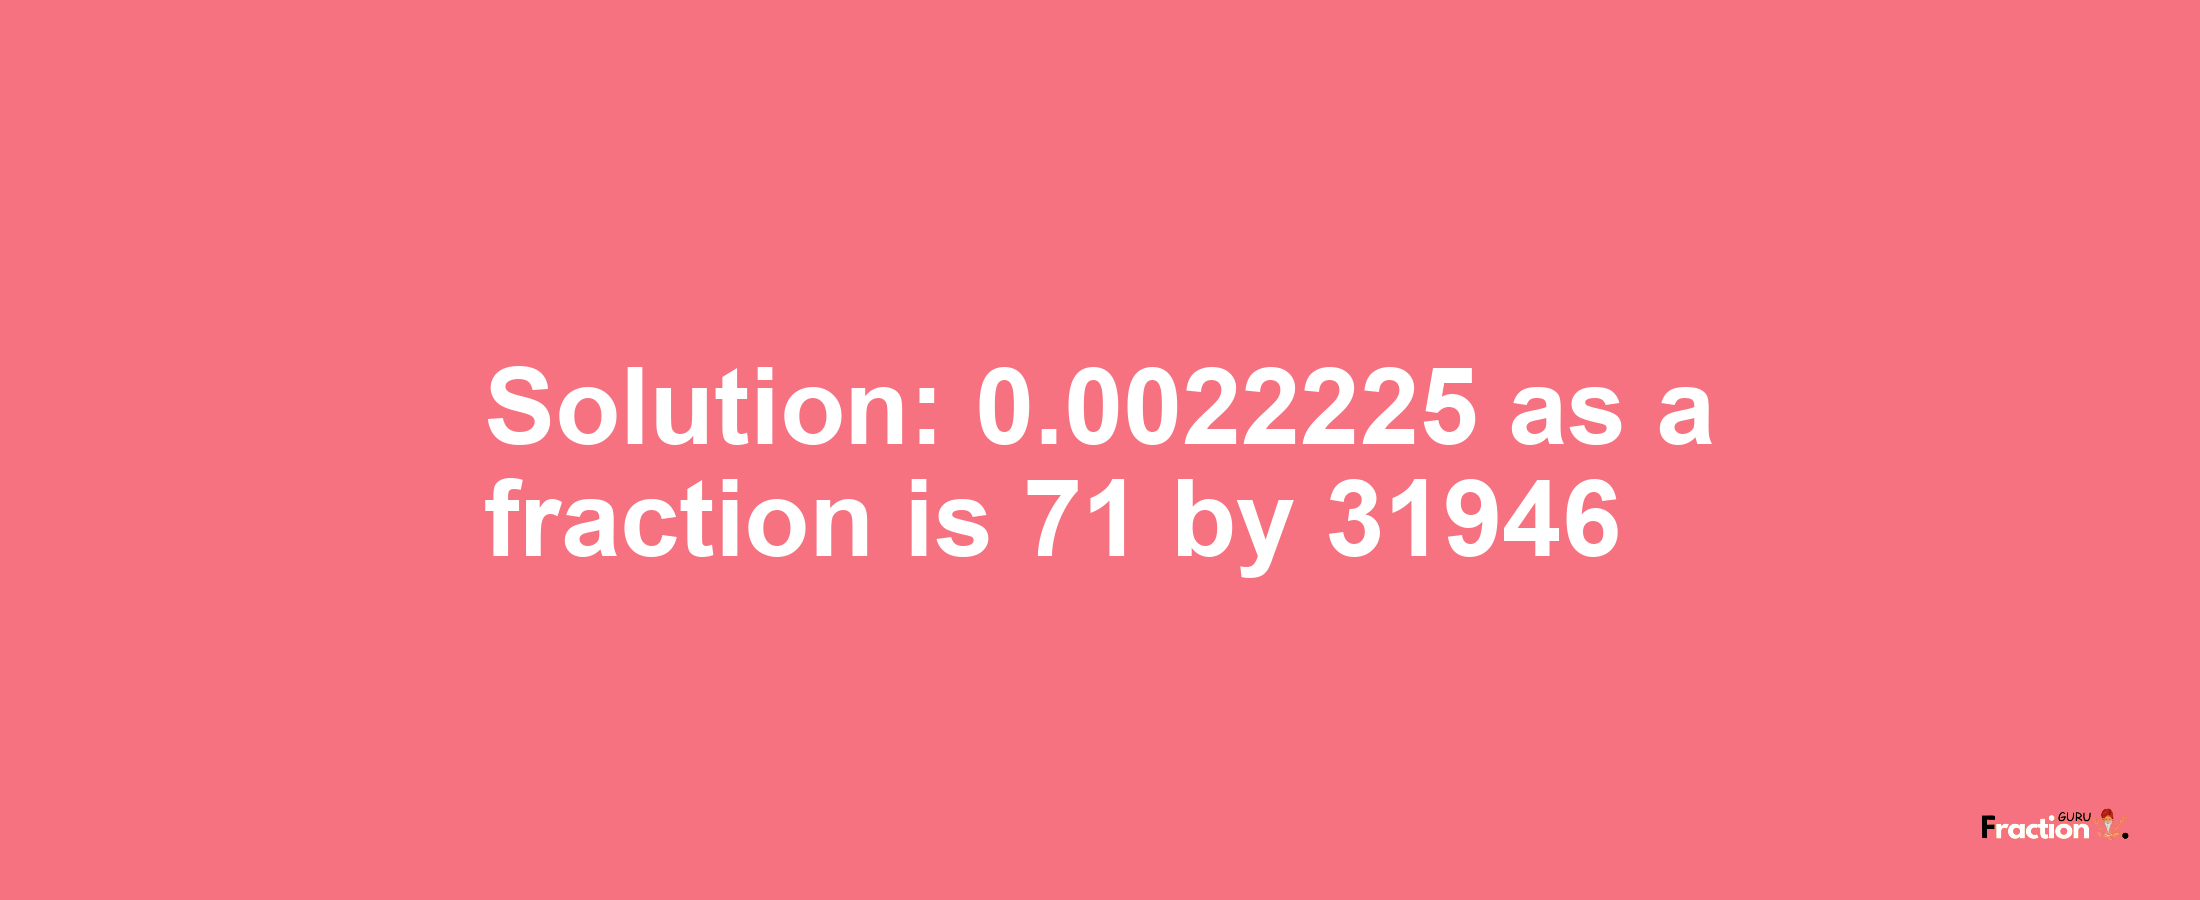 Solution:0.0022225 as a fraction is 71/31946